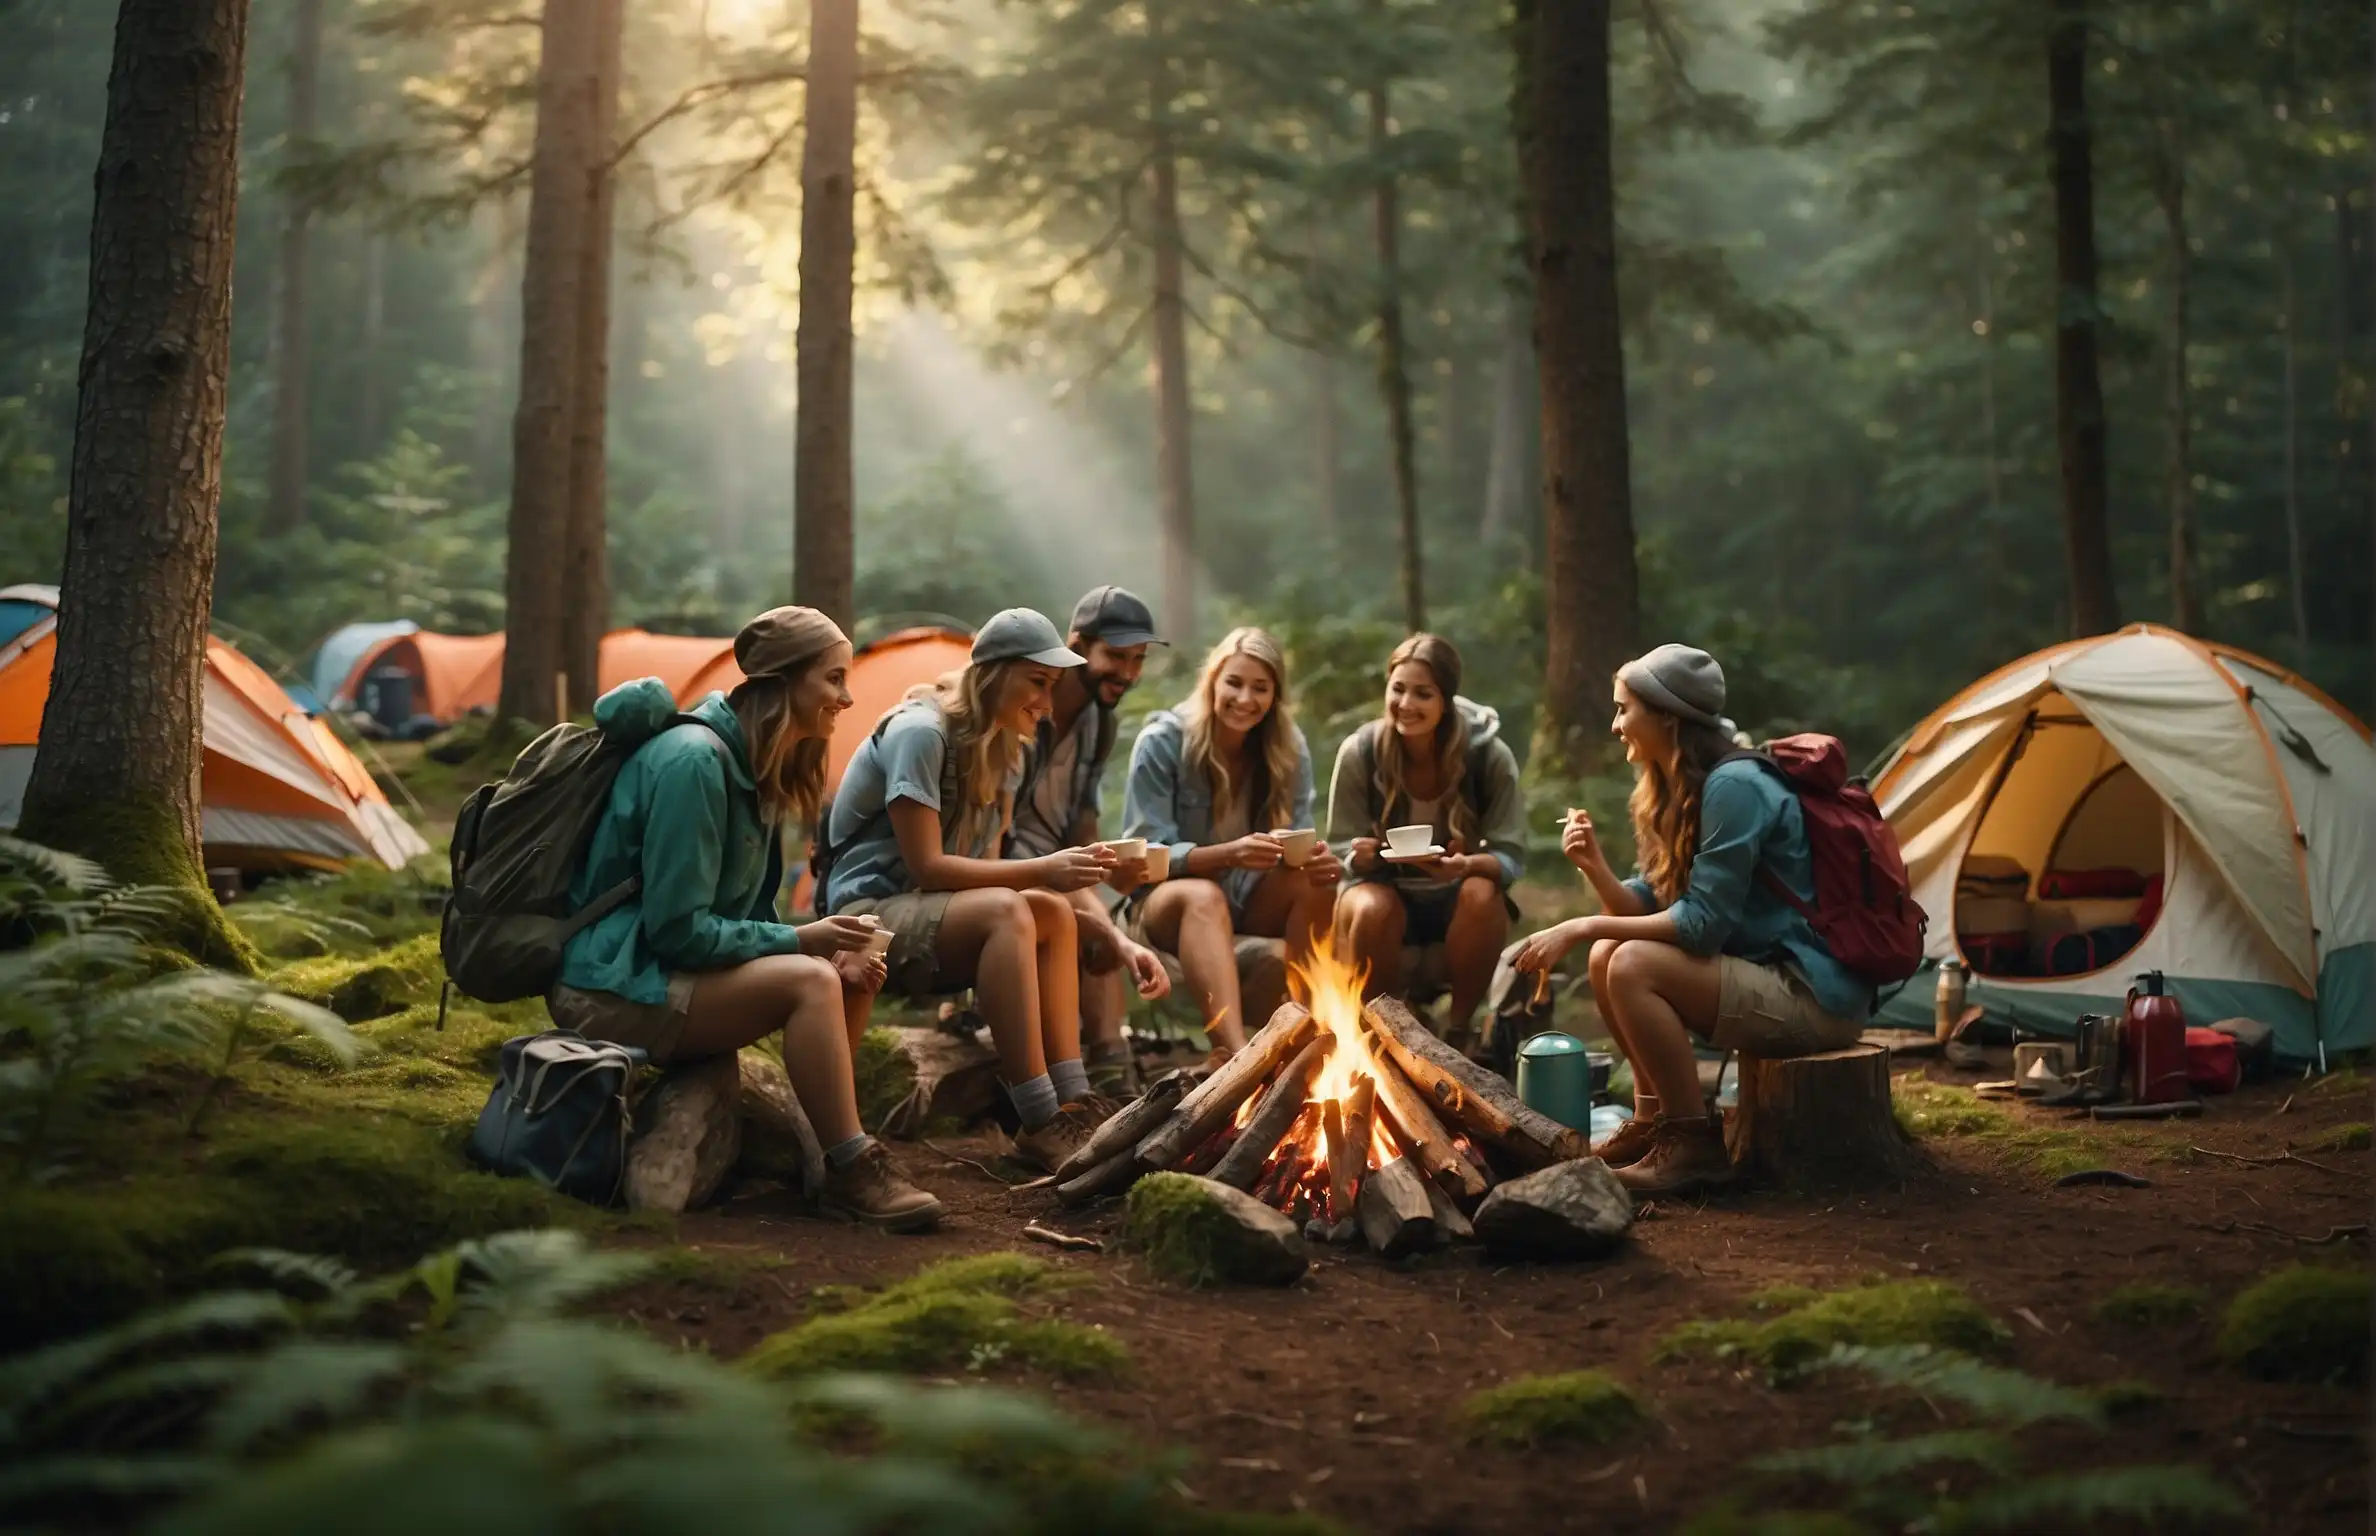 a group of young campers enjoying a camping trip in a lush, green forest